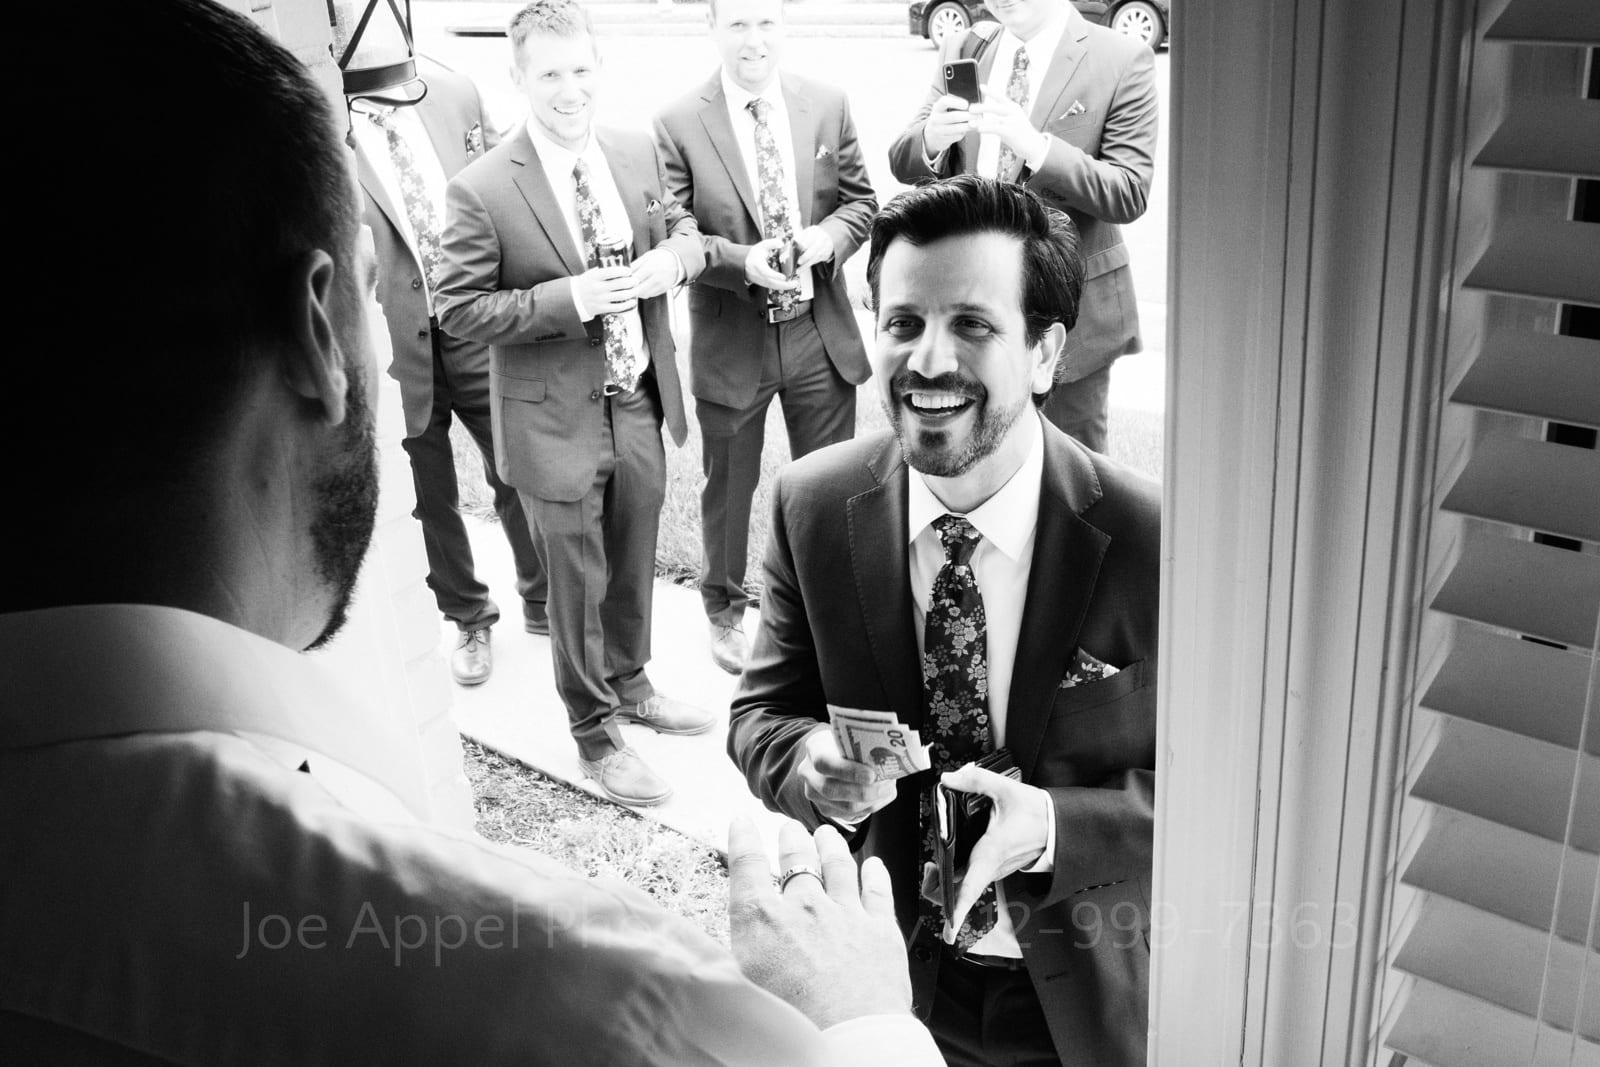 A bearded groom reaches into his wallet and pulls out money as a tall man blocking the doorway refuses the cash. Groomsmen stand behind the groom laughing.